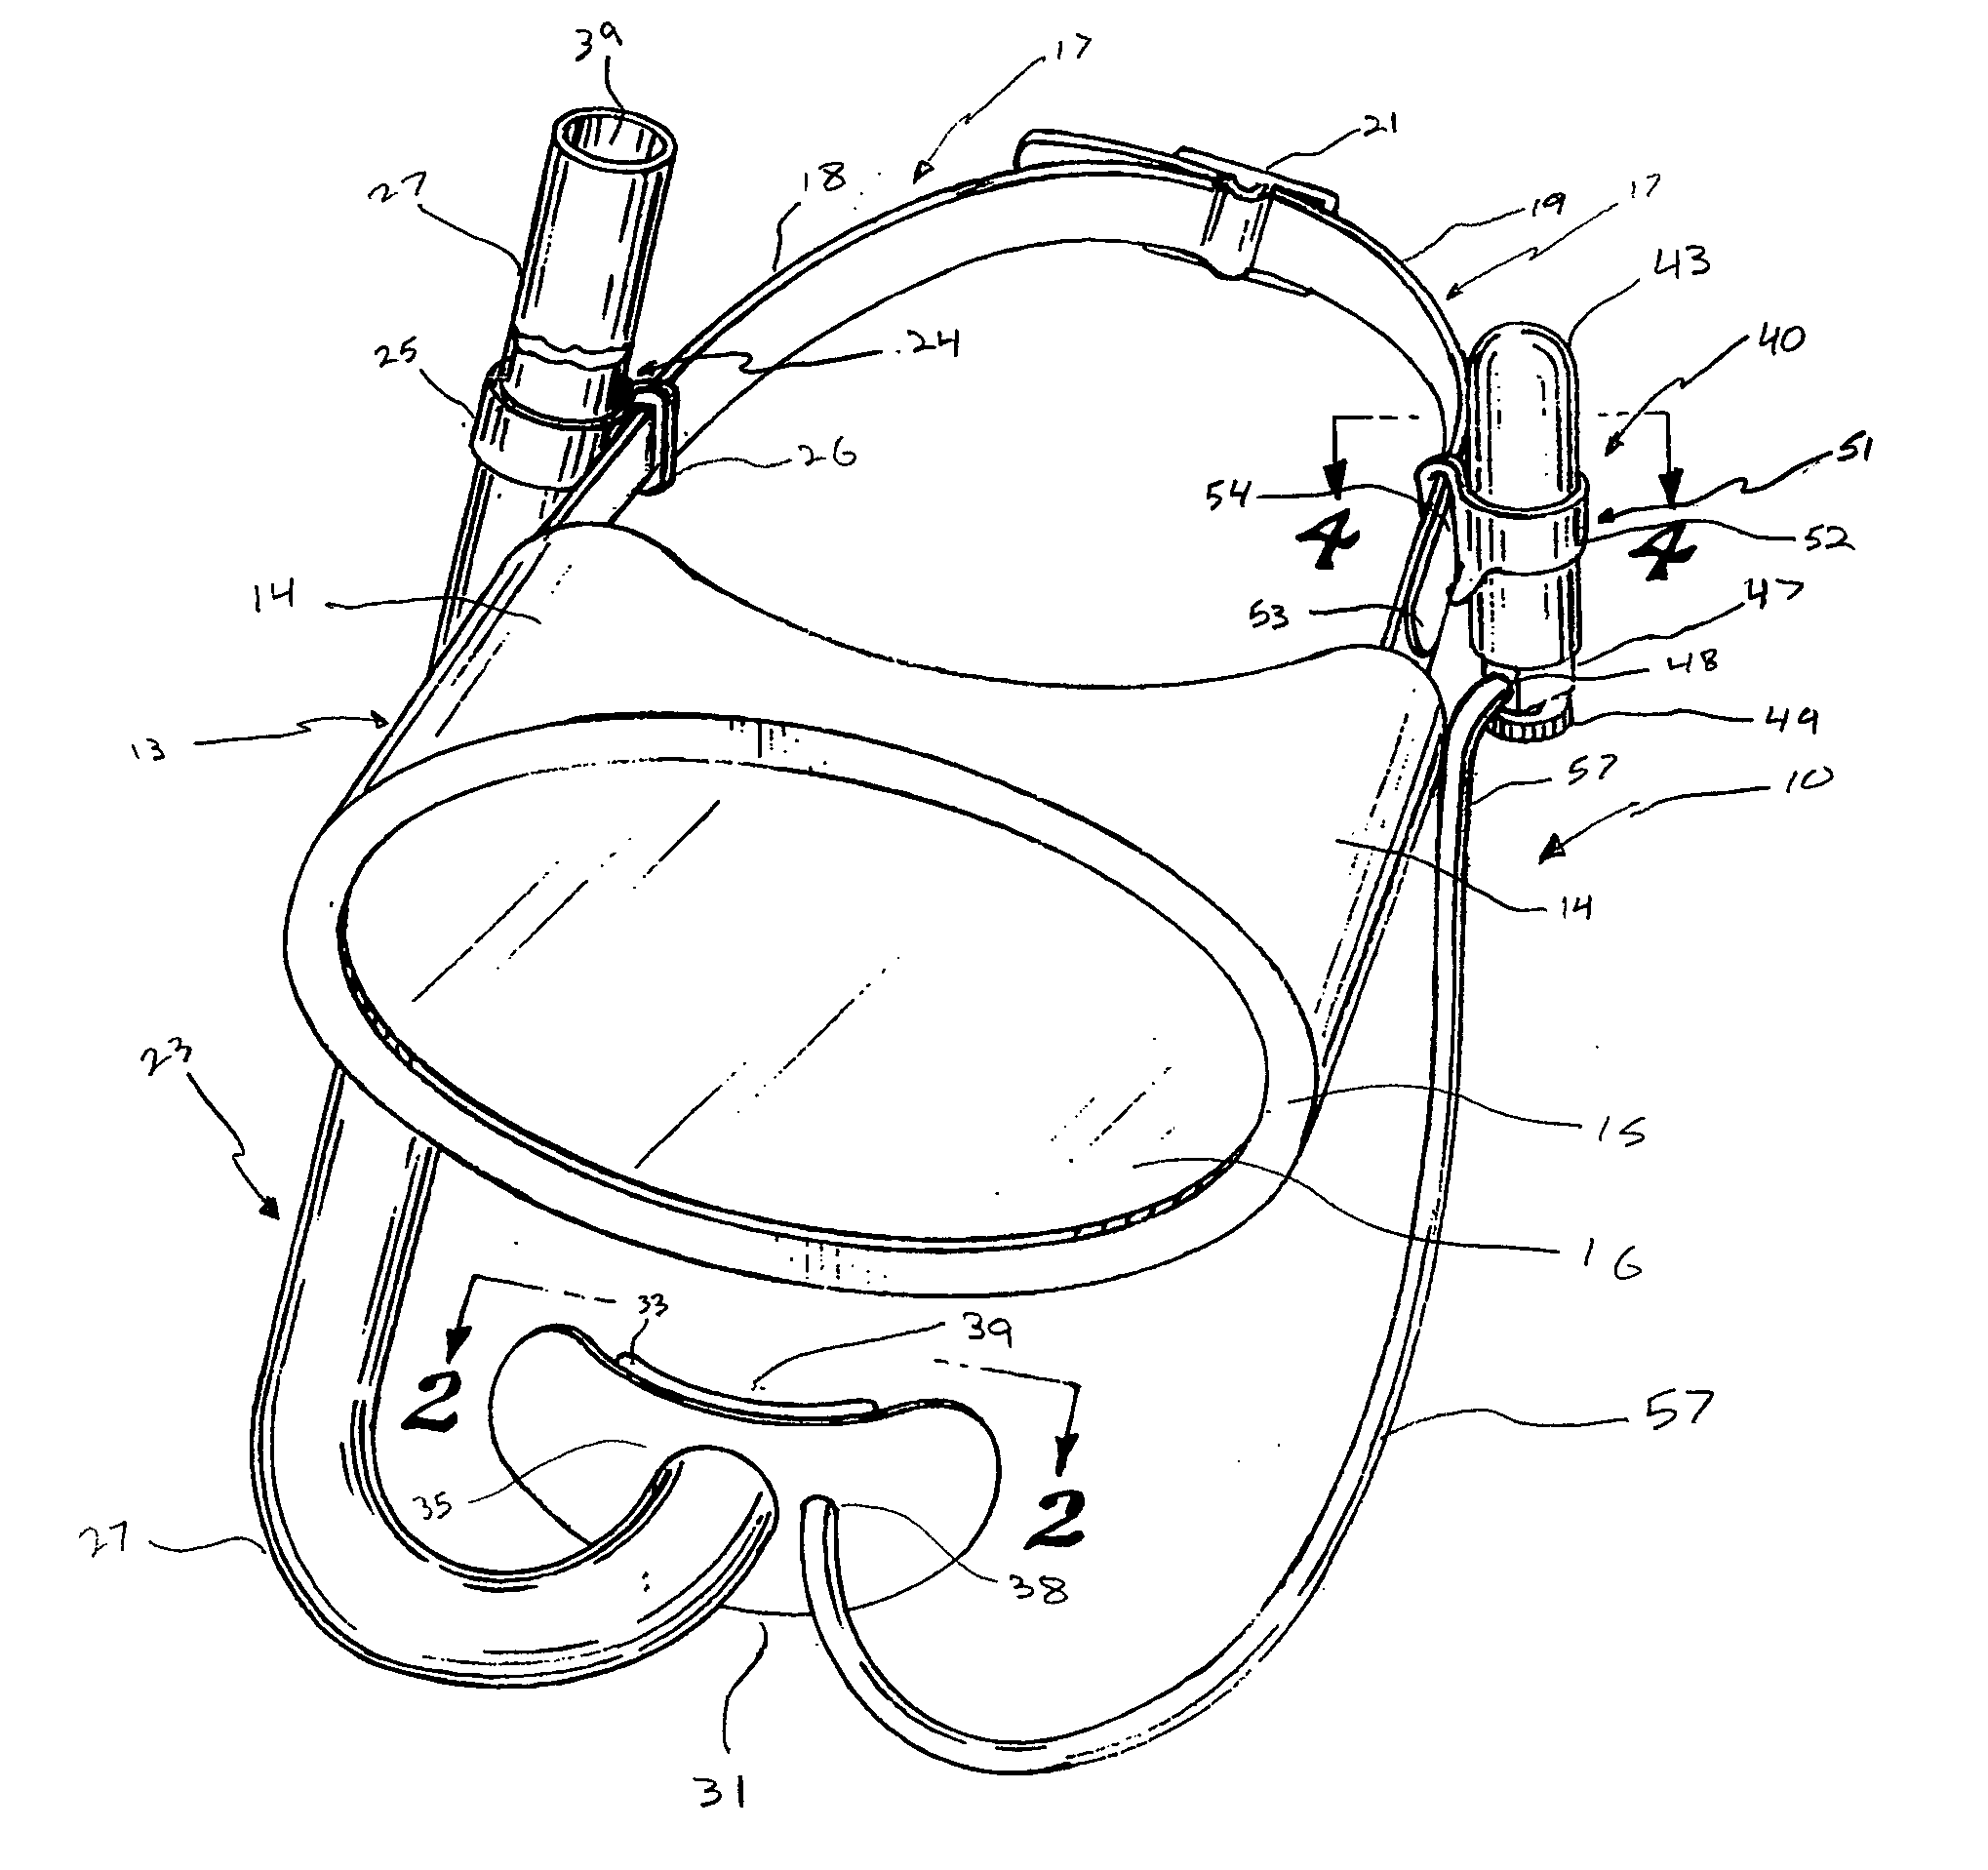 Combination oxygen supplement and swimming snorkel apparatus